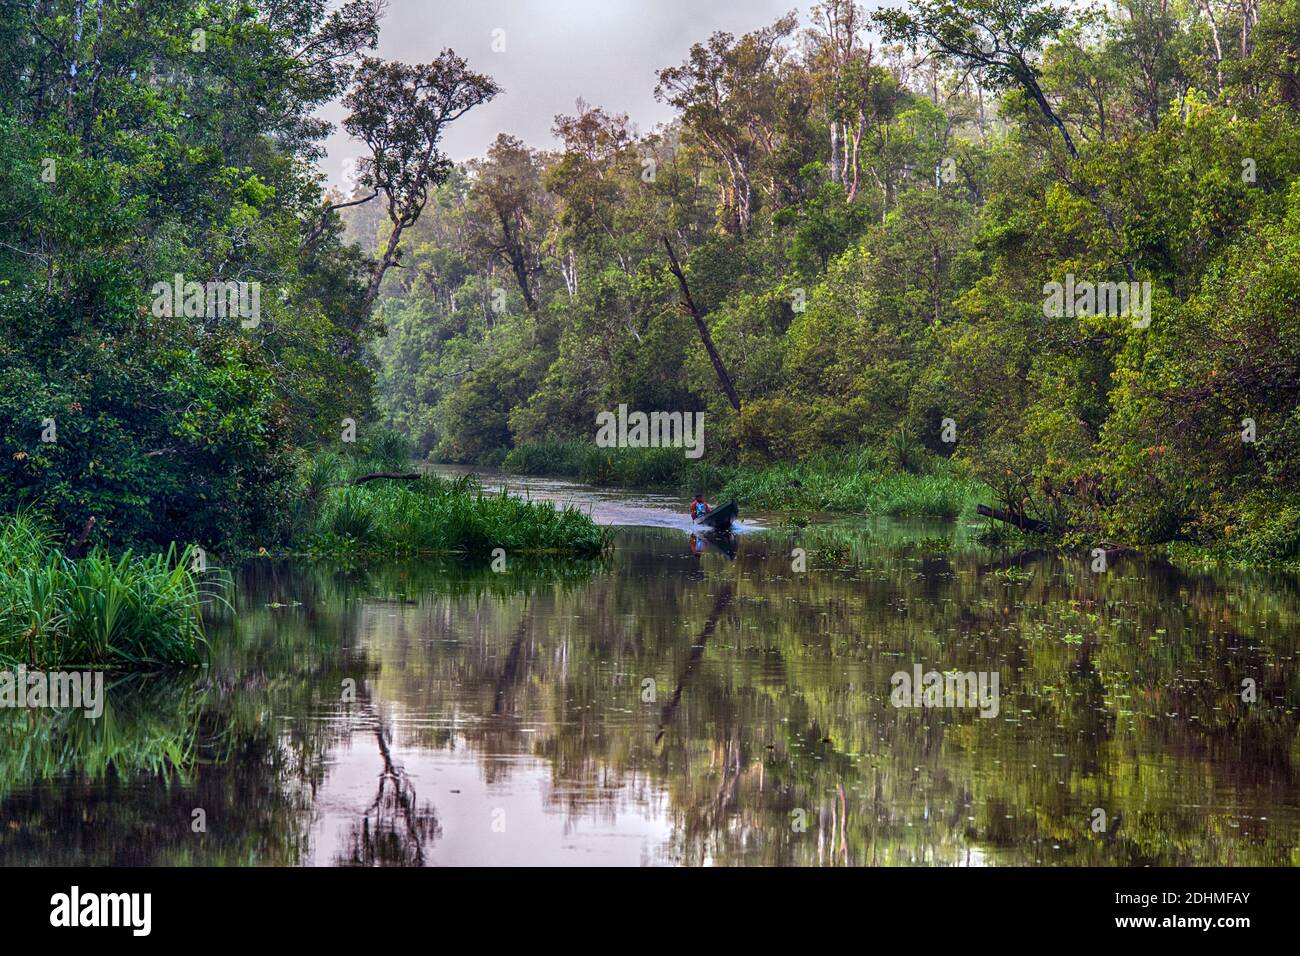 Rainforest along the Sekonyer River (a tributary to Kumai River) in Kalimantan (Tanjung Puting National Park), southern Borneo. Stock Photo